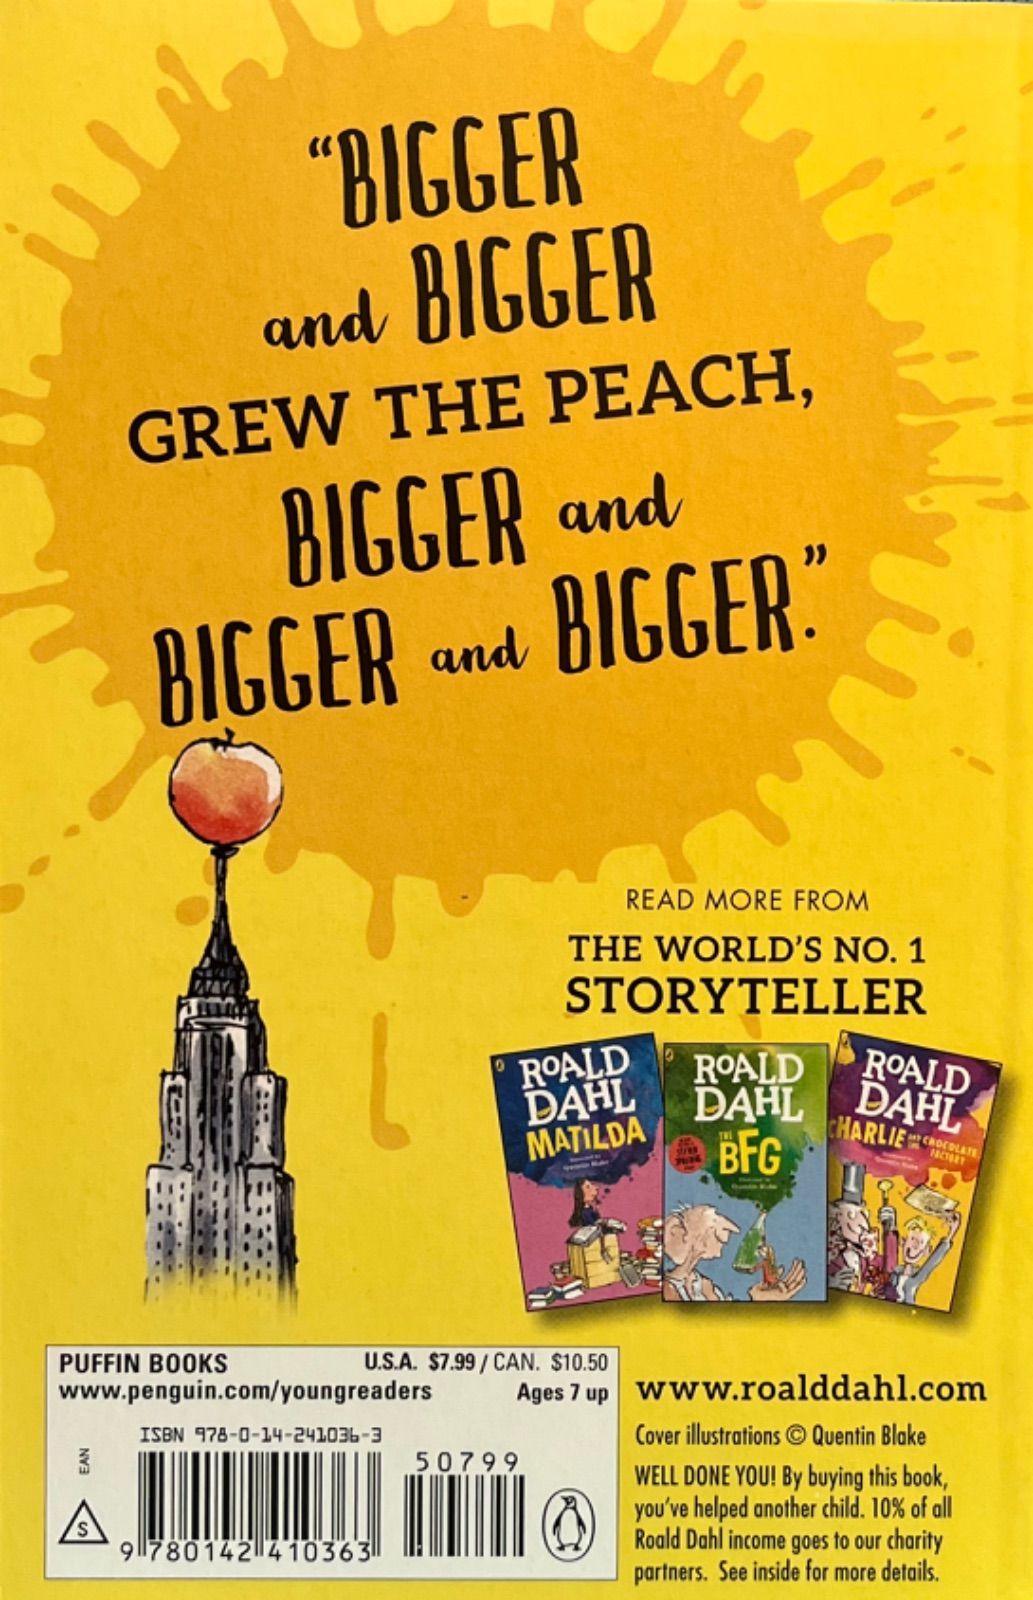 JAMES and the Giant Peach